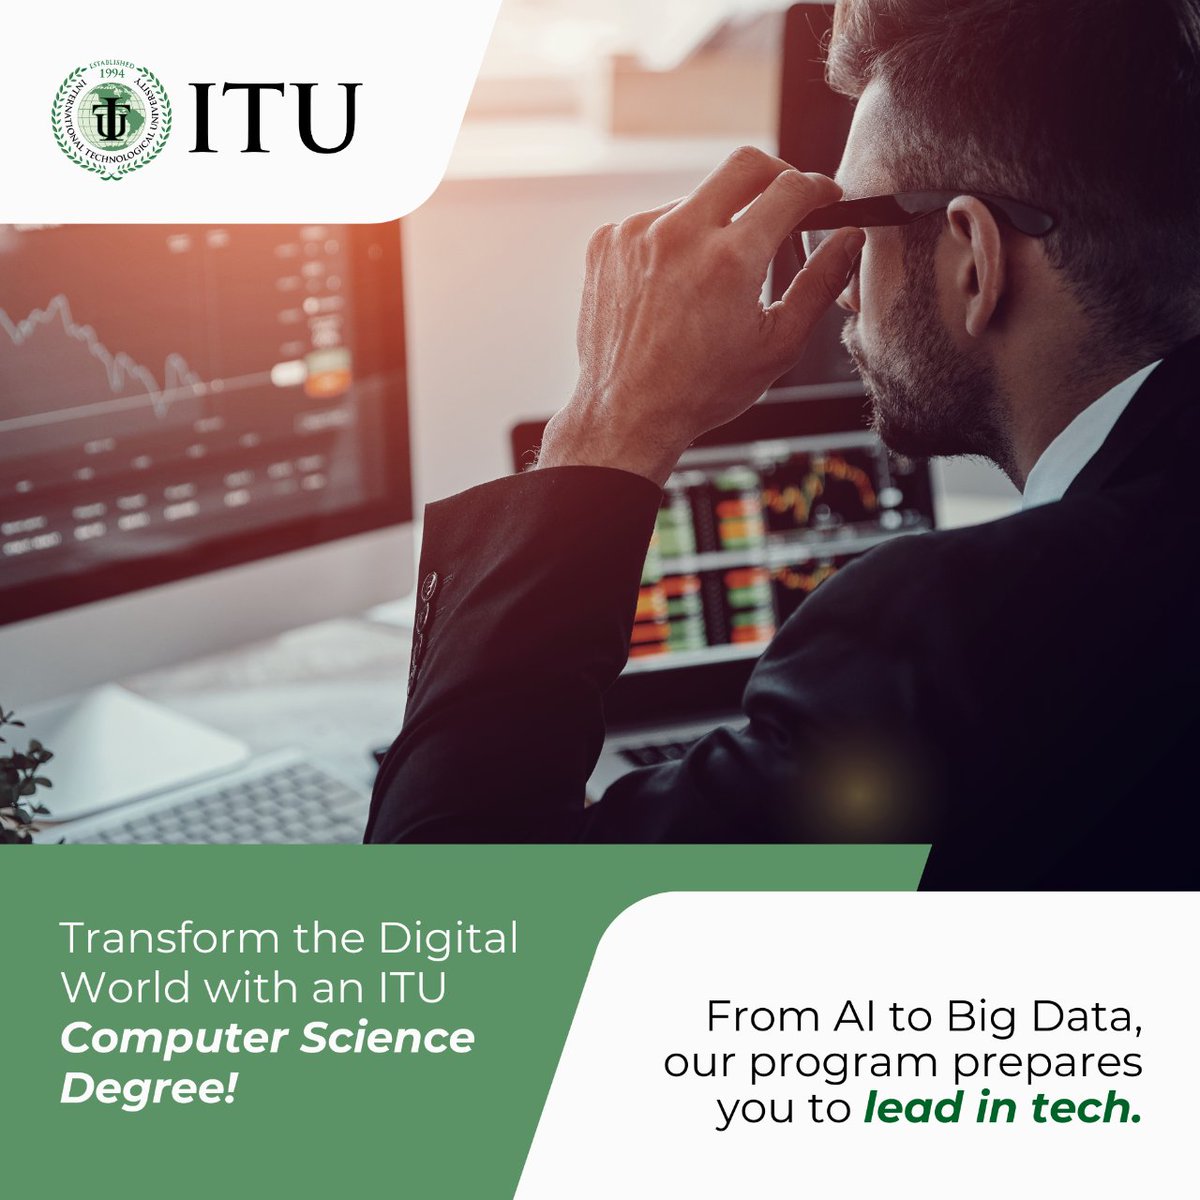 Transform the Digital World with an ITU Master of Science in Computer Science Degree!
Learn more: discover.itu.edu

#itusv #computerscience #masterdegree #innovation #techeducation #internshipsatitu #programming #systemdesign